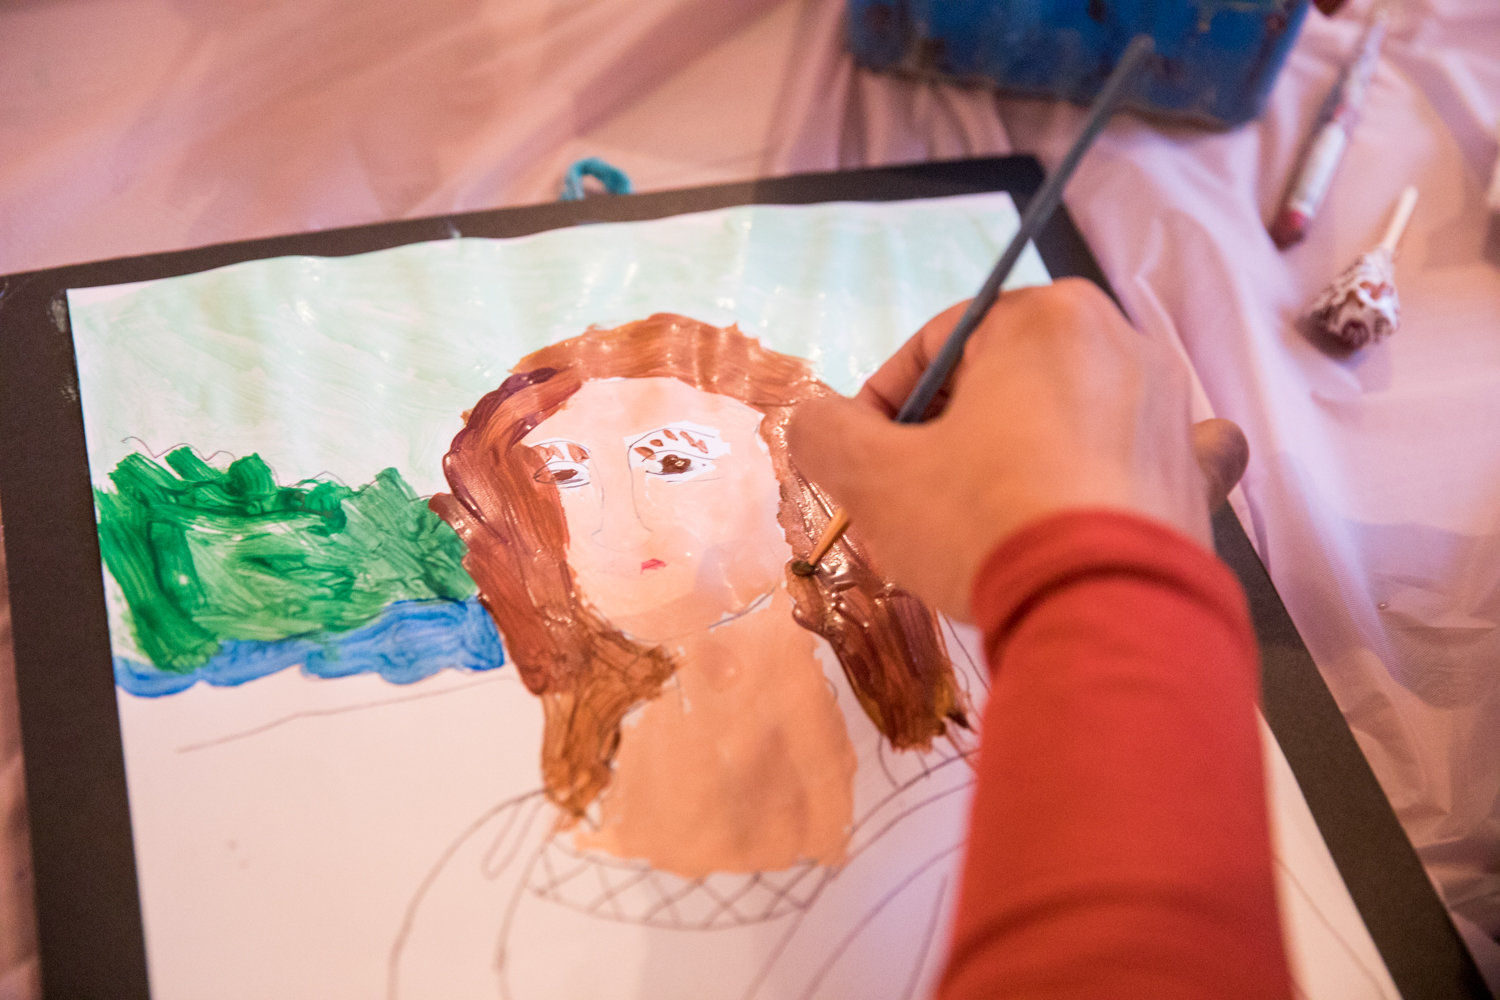 One of the goals during a recent painting workshop at Yo-Burger on Riverdale Avenue was to re-create the Mona Lisa. Children had a drawing of the painting to work from, which was provided by artist Cathy Sanacore.